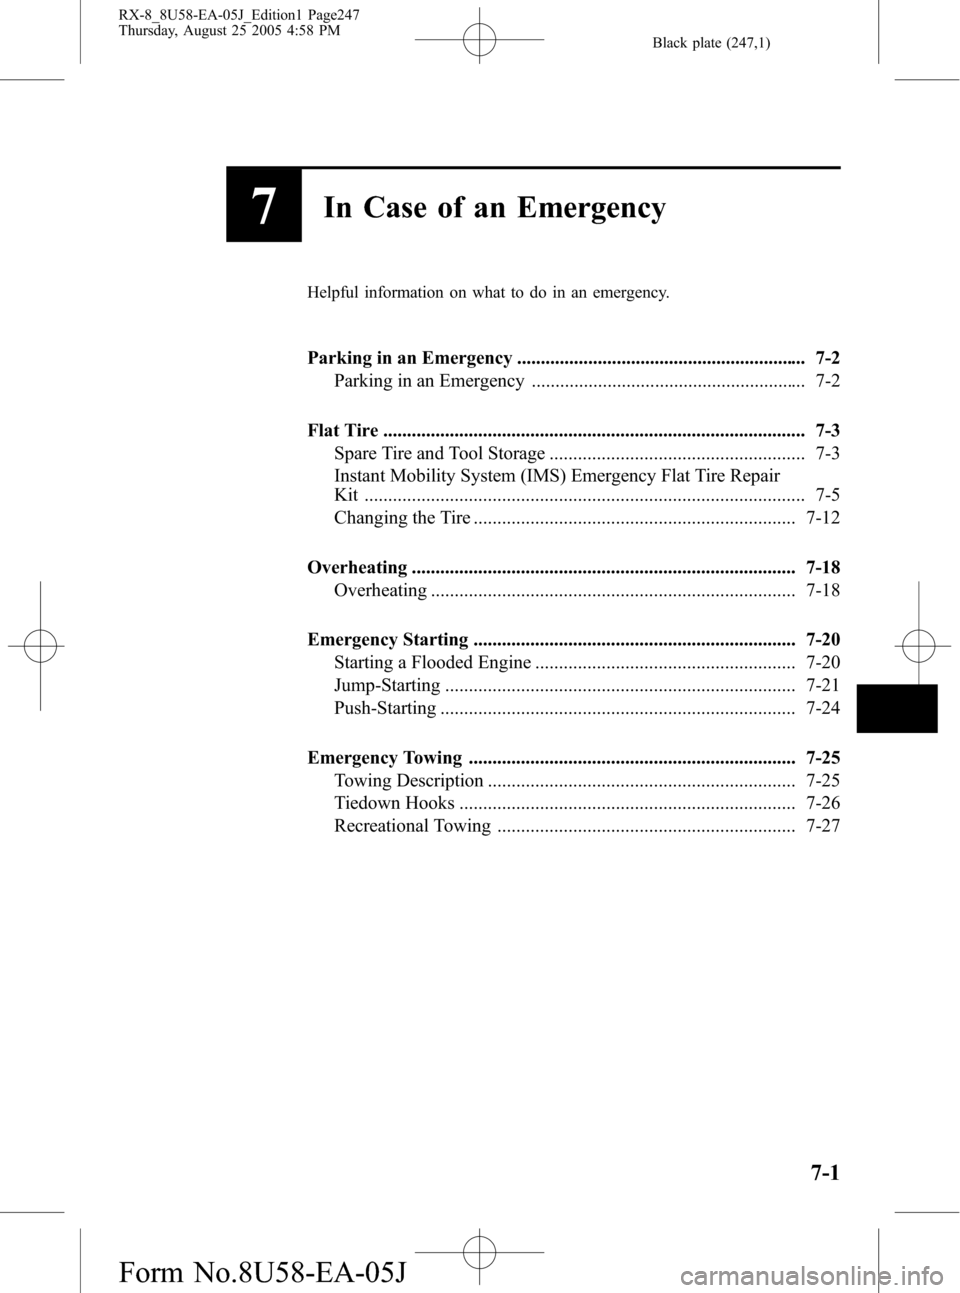 MAZDA MODEL RX 8 2006  Owners Manual (in English) Black plate (247,1)
7In Case of an Emergency
Helpful information on what to do in an emergency.
Parking in an Emergency ............................................................. 7-2
Parking in an 